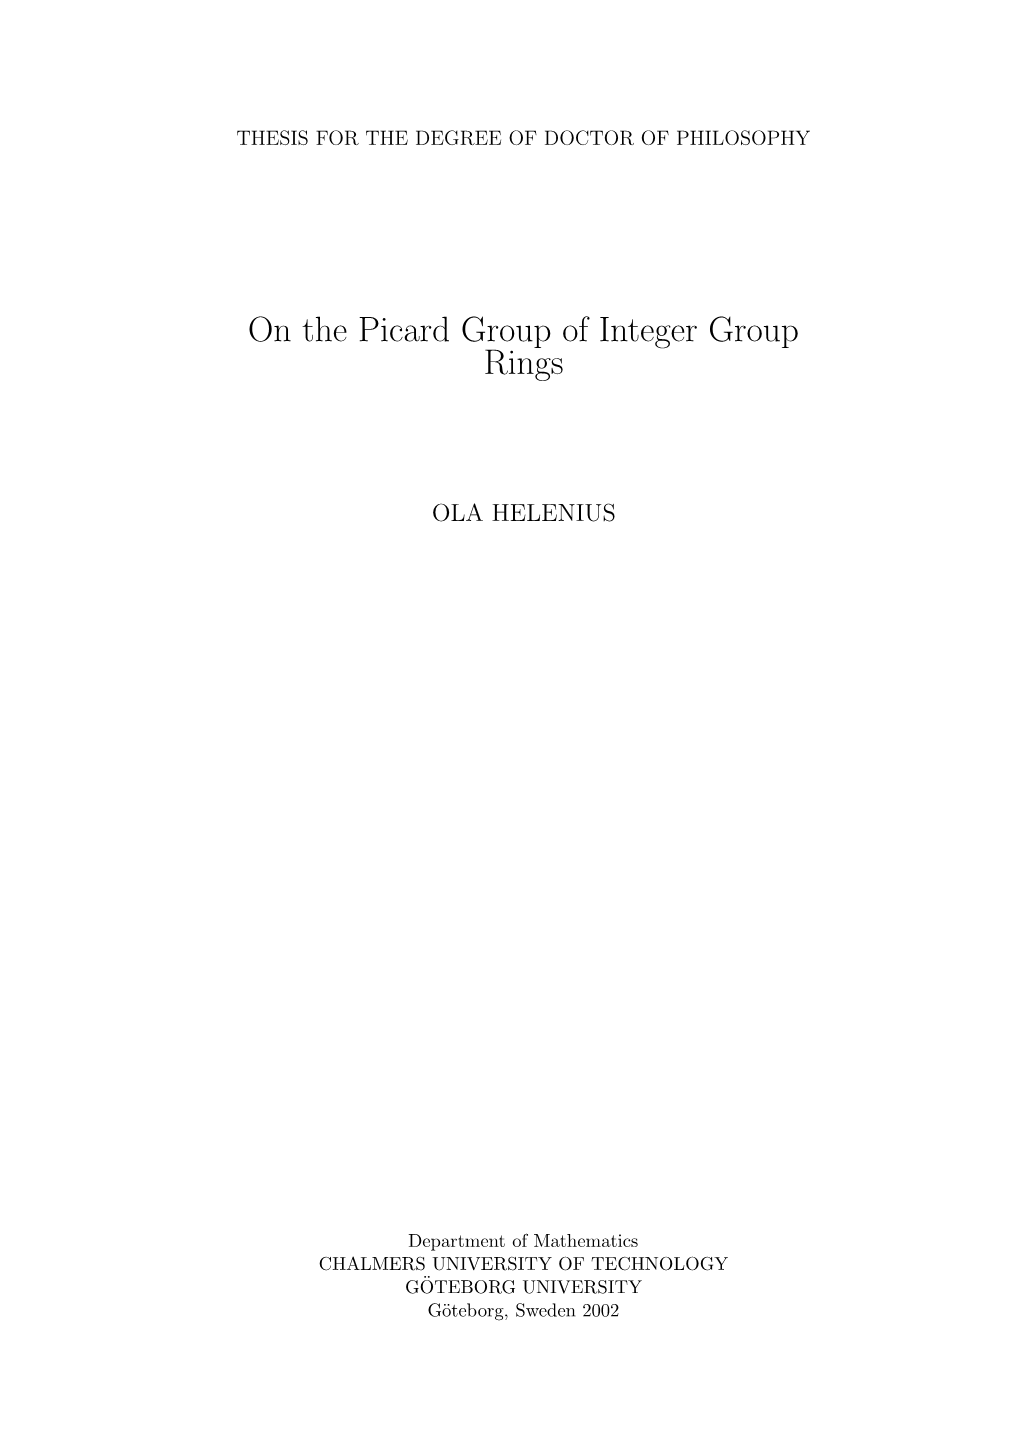 On the Picard Group of Integer Group Rings